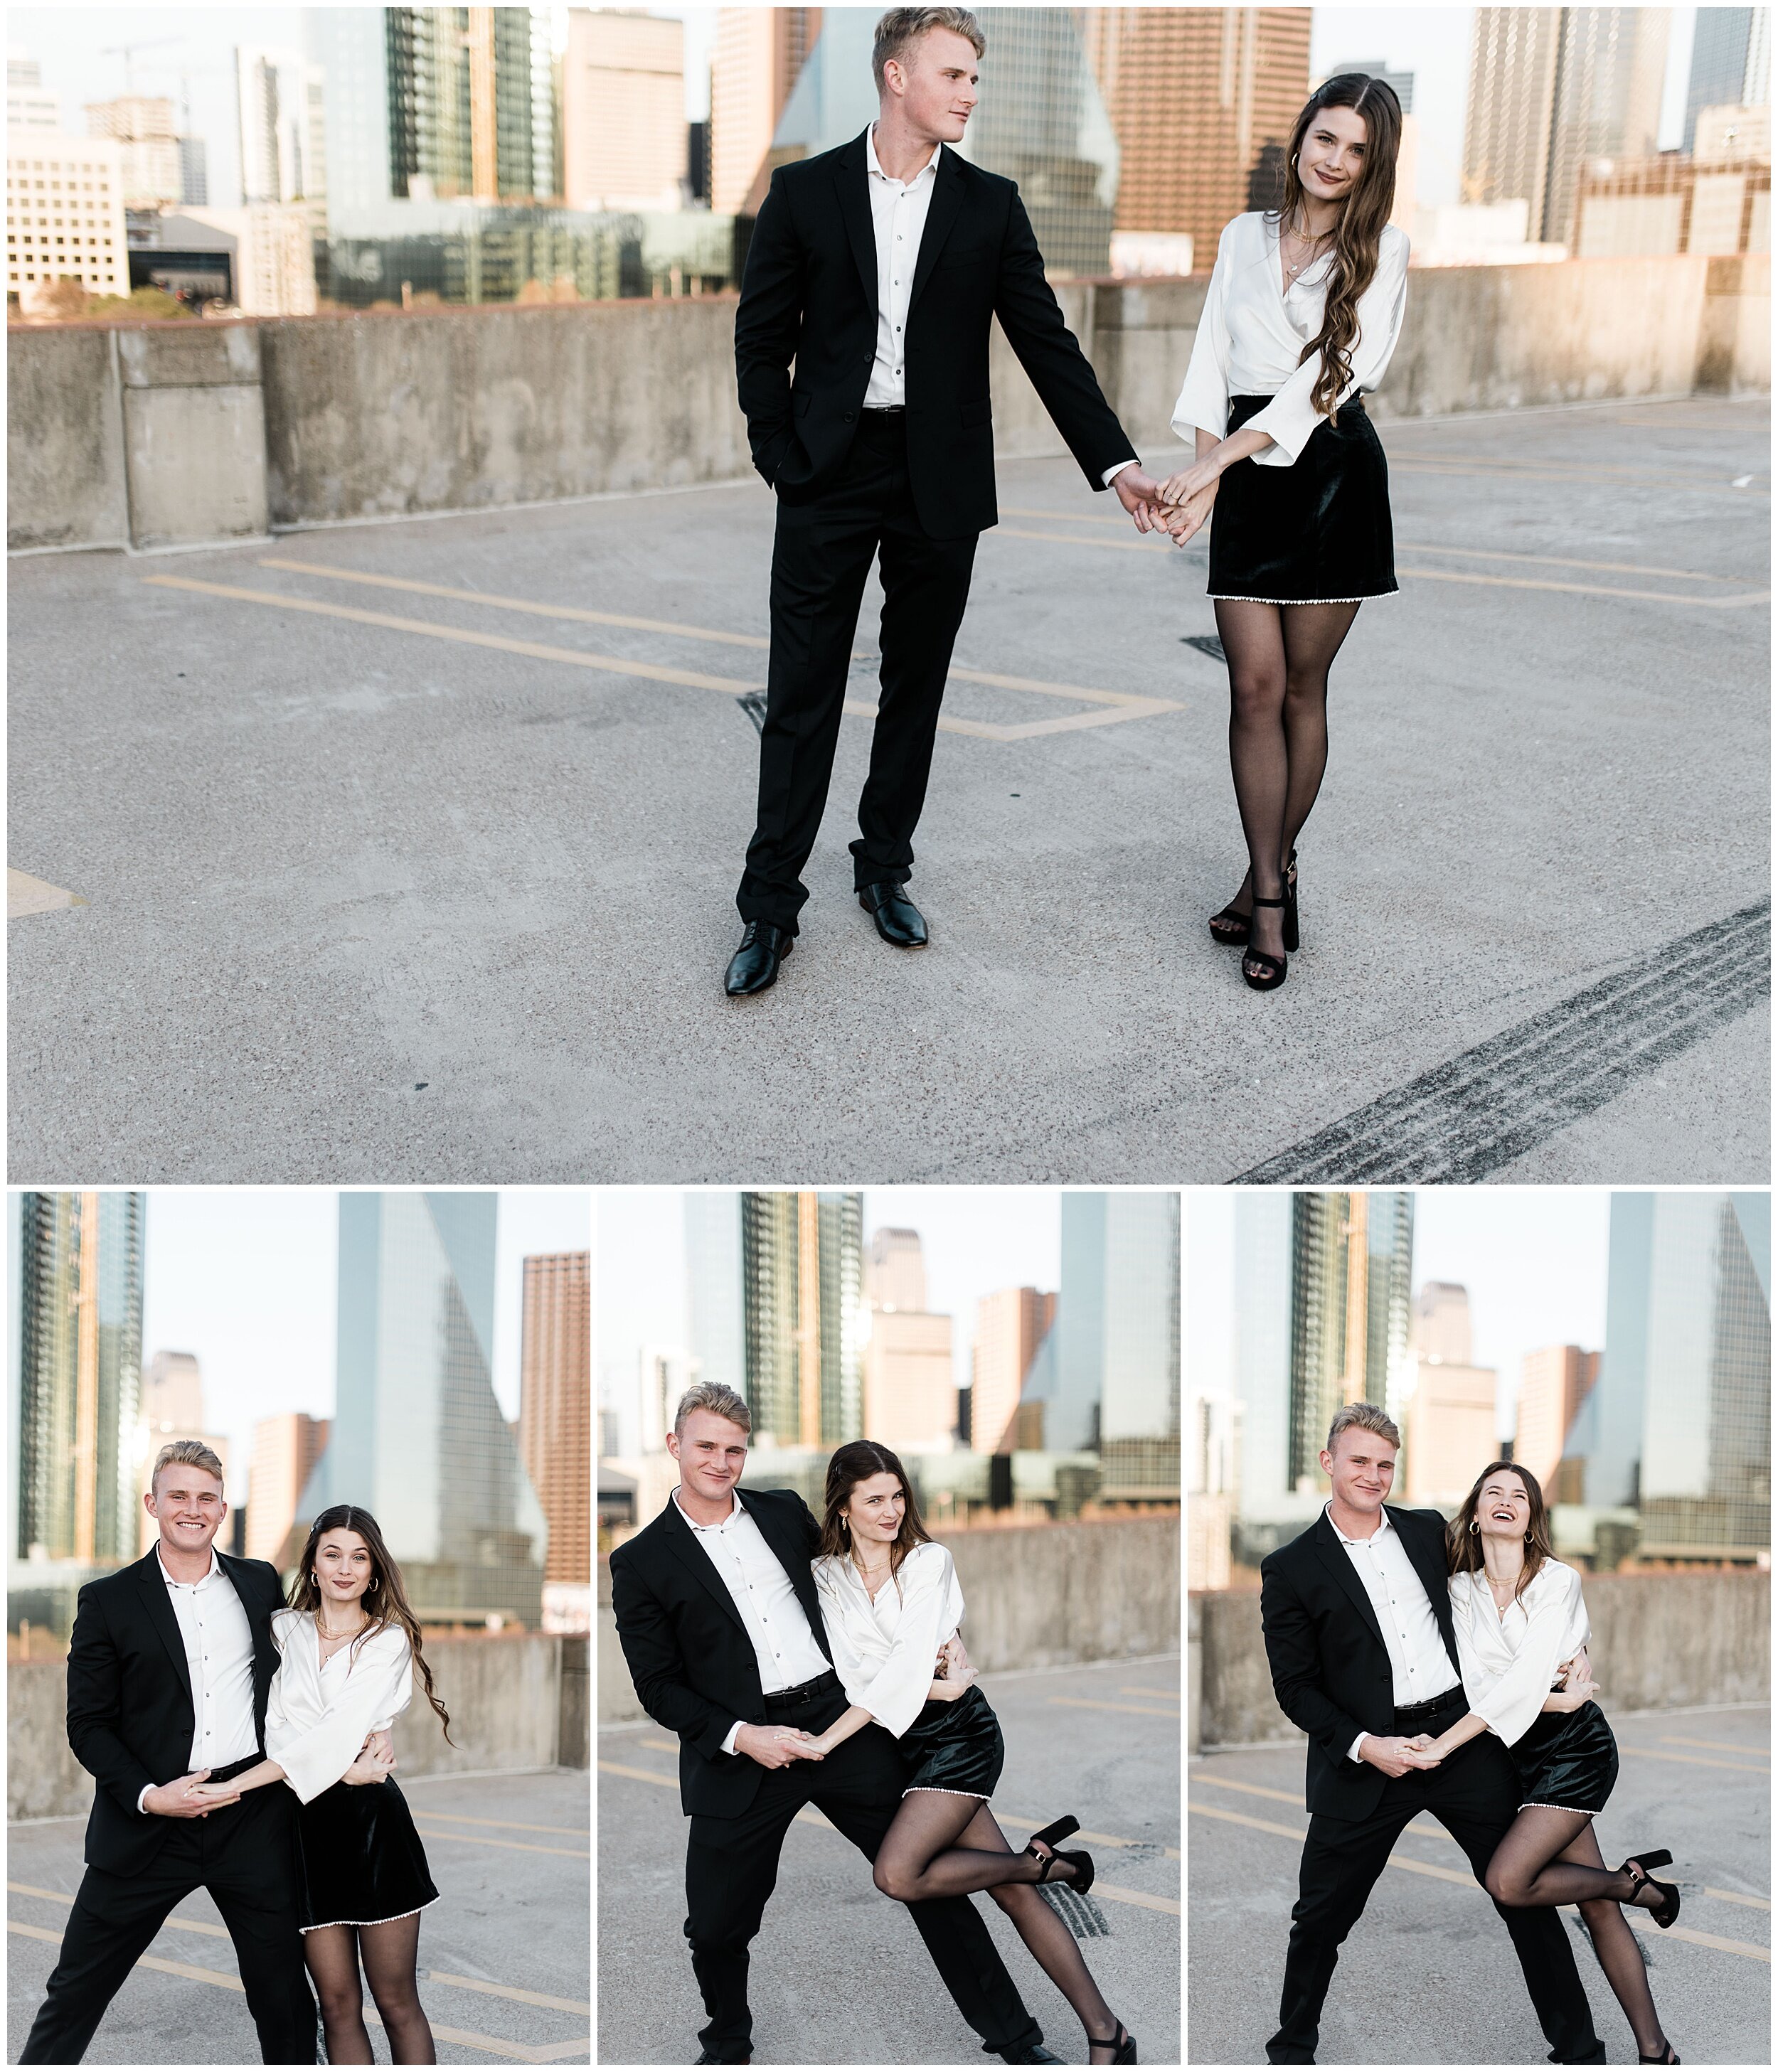  downtown dallas engagement session | lumen room engagement session | www.jordanmitchellphotography.com 